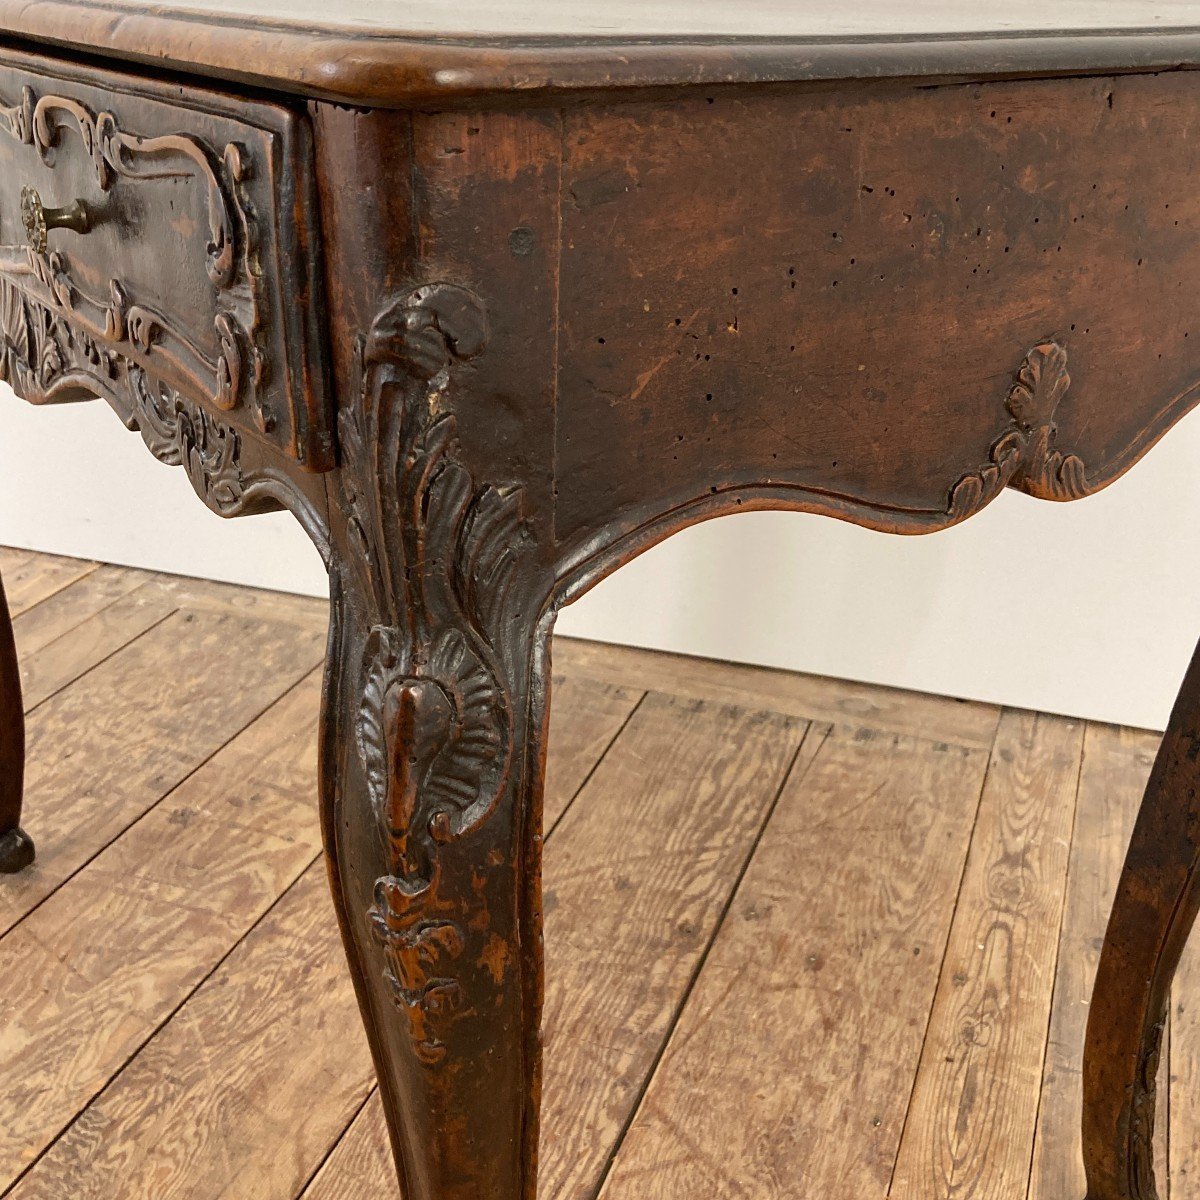 Provençal Table From The Regence Period-photo-7